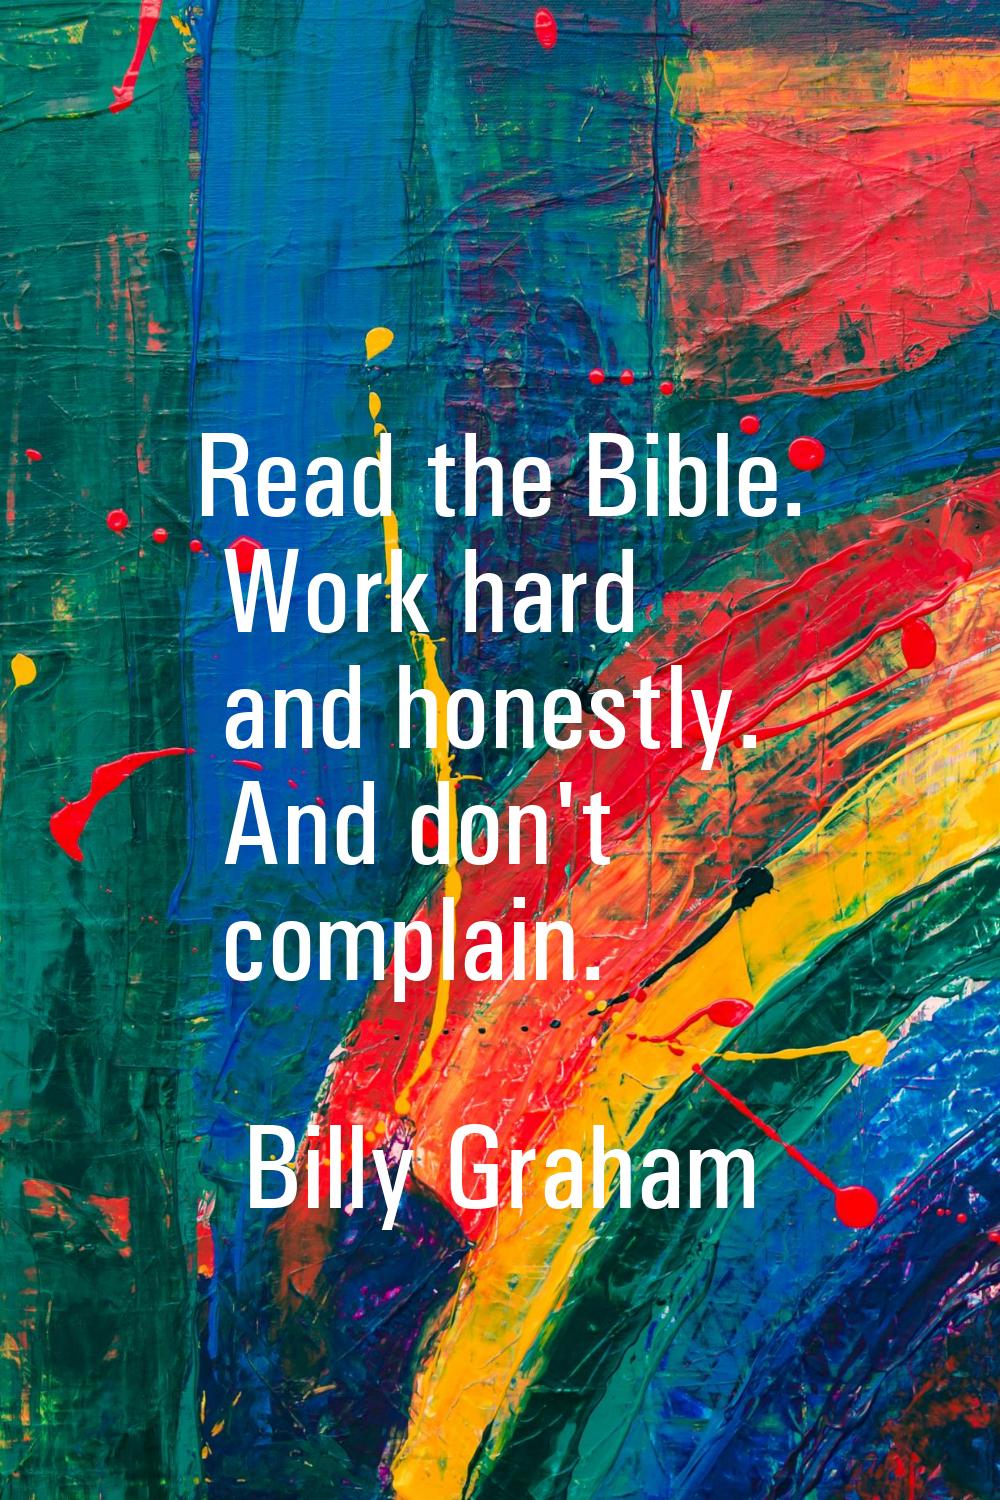 Read the Bible. Work hard and honestly. And don't complain.